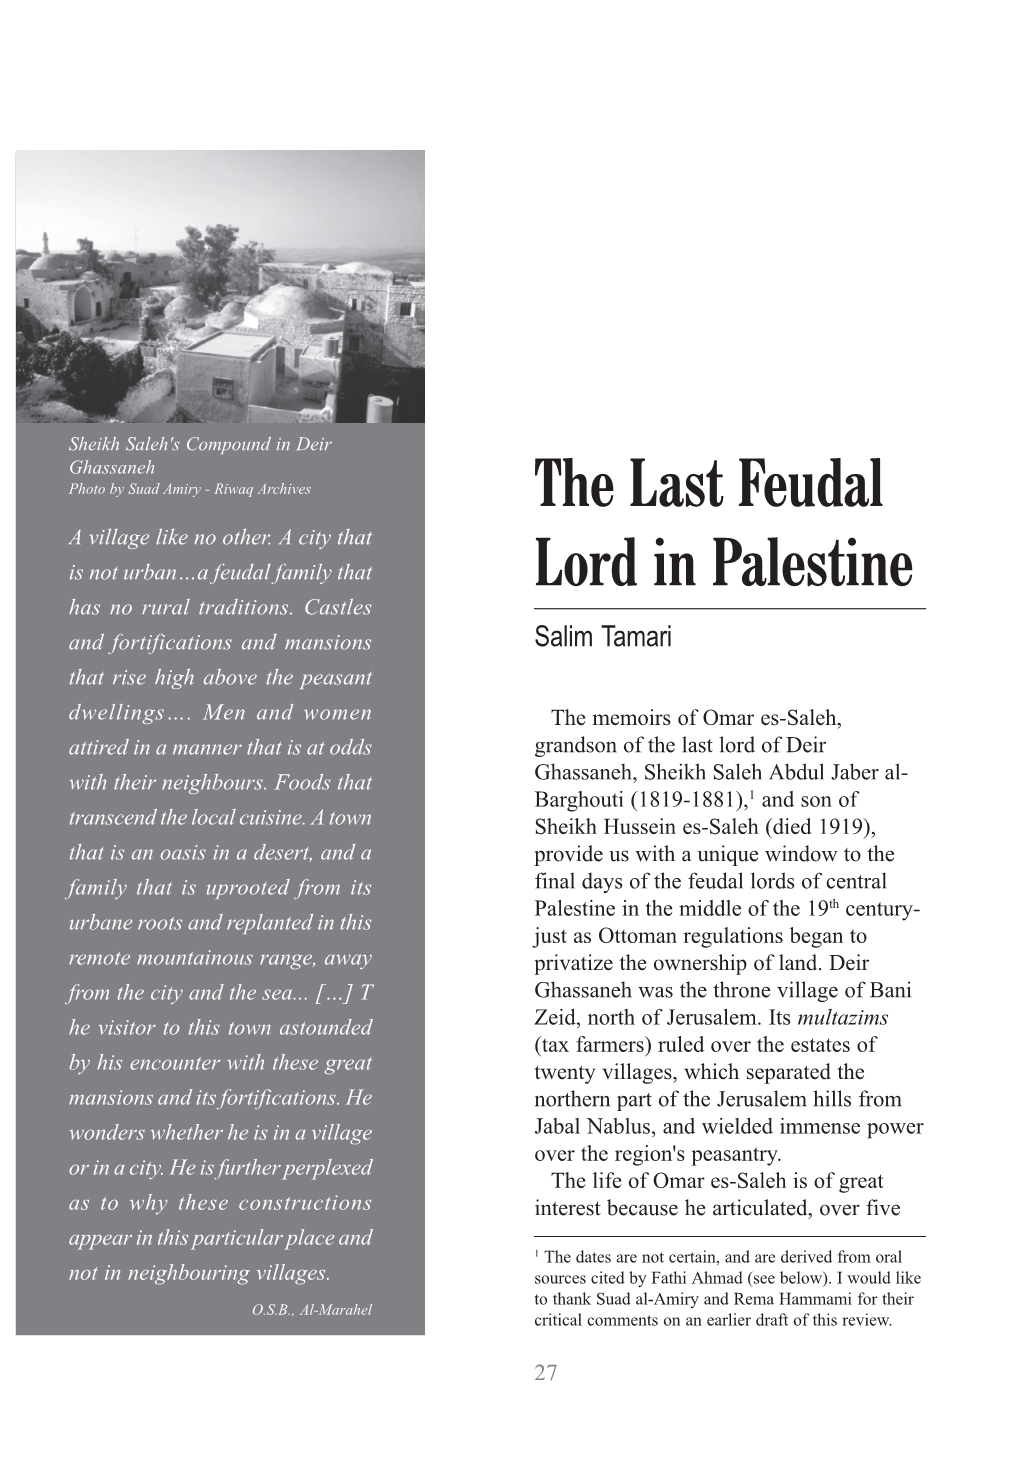 The Last Feudal Lord in Palestine